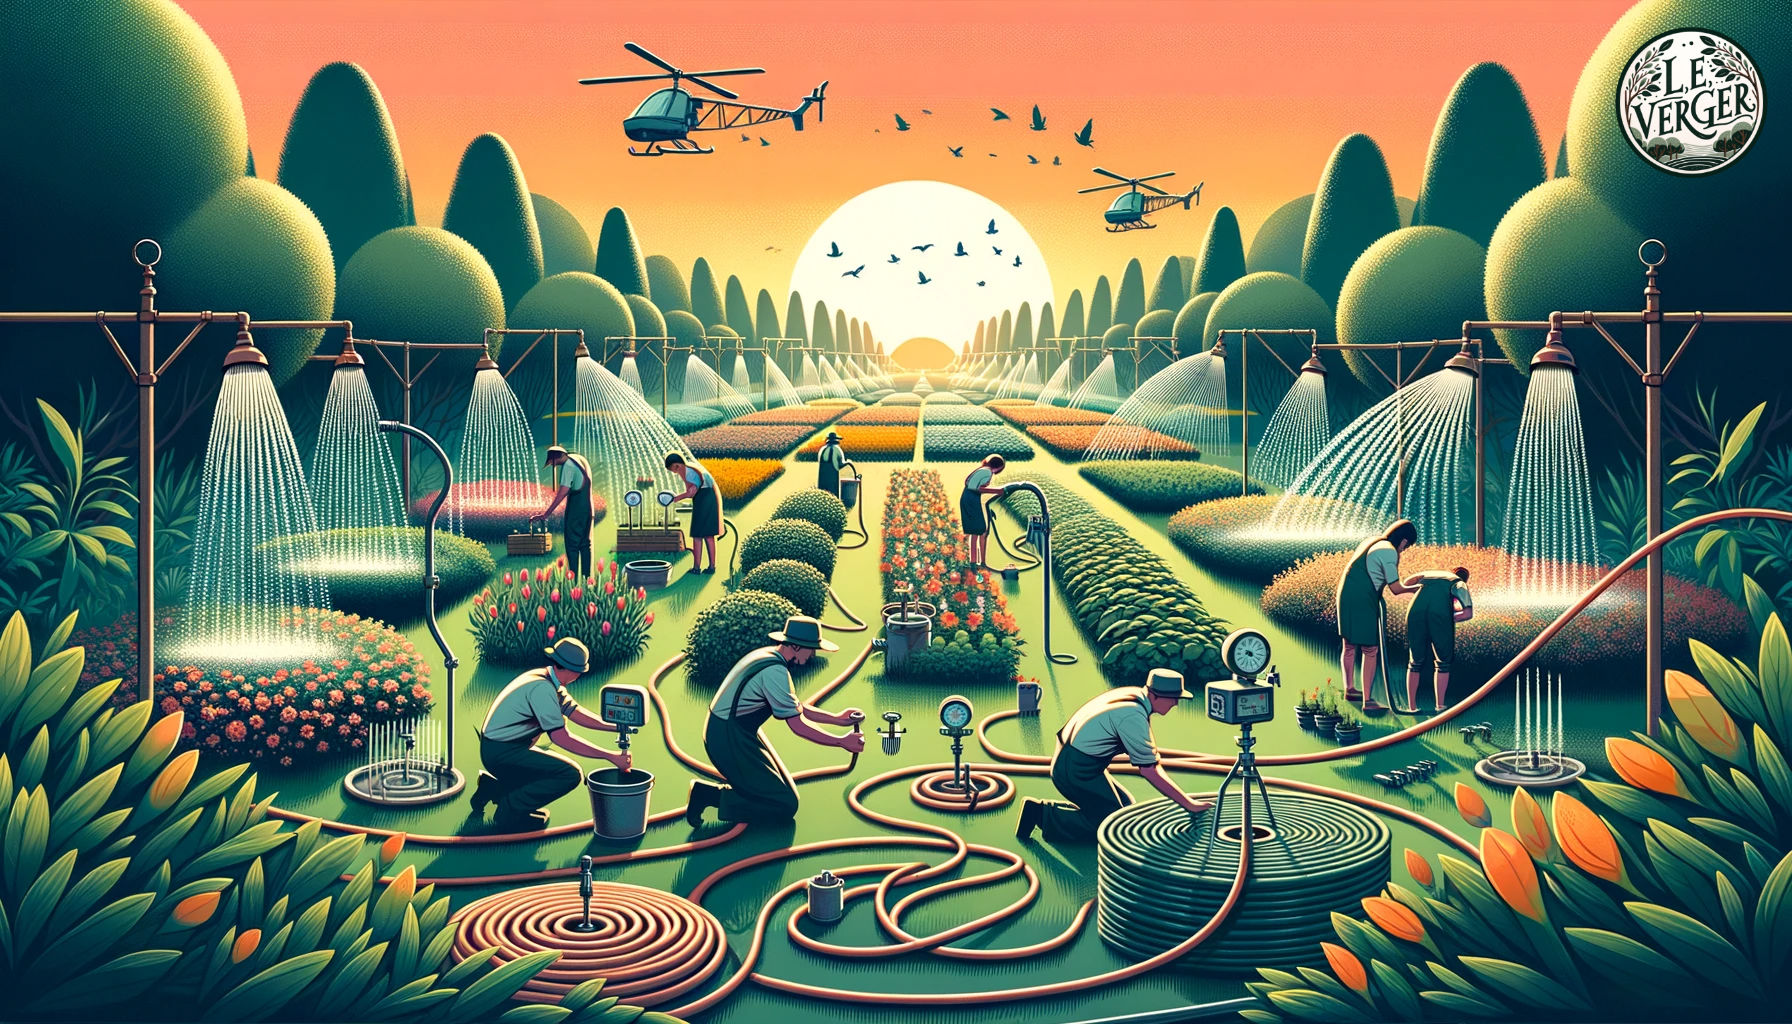 Illustration, wide aspect: A serene garden landscape during sunset. Multiple irrigation systems, such as soaker hoses and sprinklers, are visible. Diverse gardeners are engrossed in their tasks, with one person setting up a timer for the irrigation and another collecting rainwater.